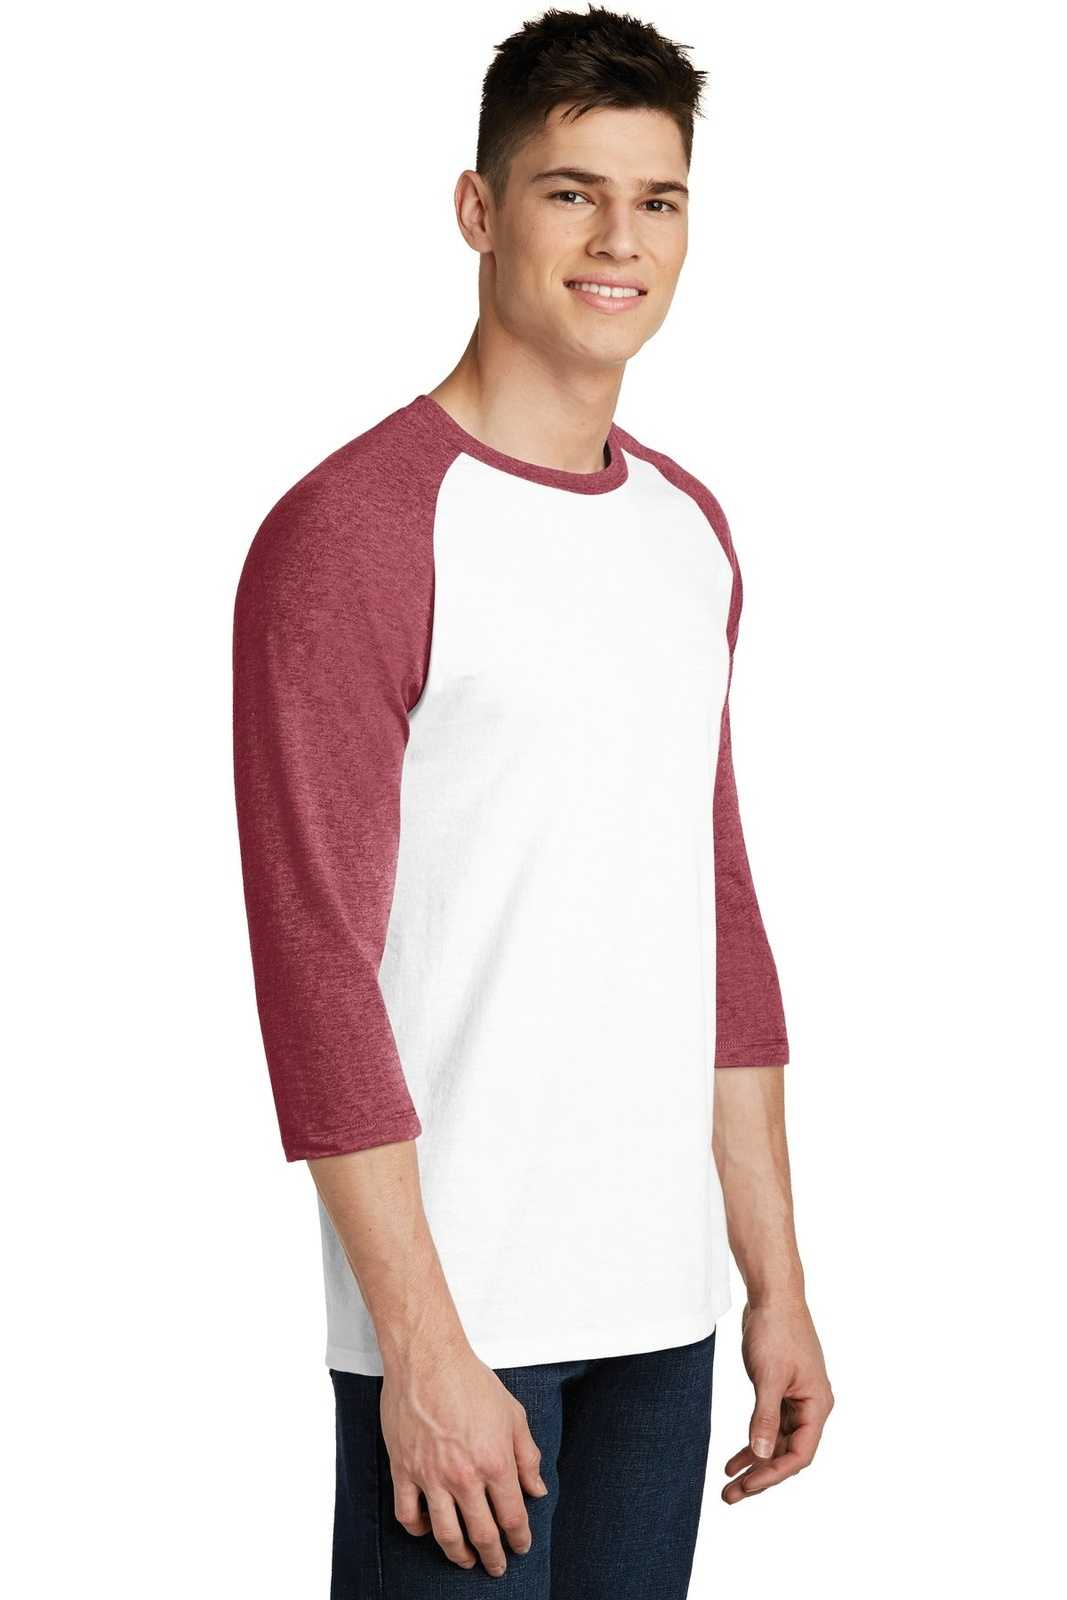 District DT6210 Very Important Tee 3/4-Sleeve Raglan - Heathered Red White - HIT a Double - 4